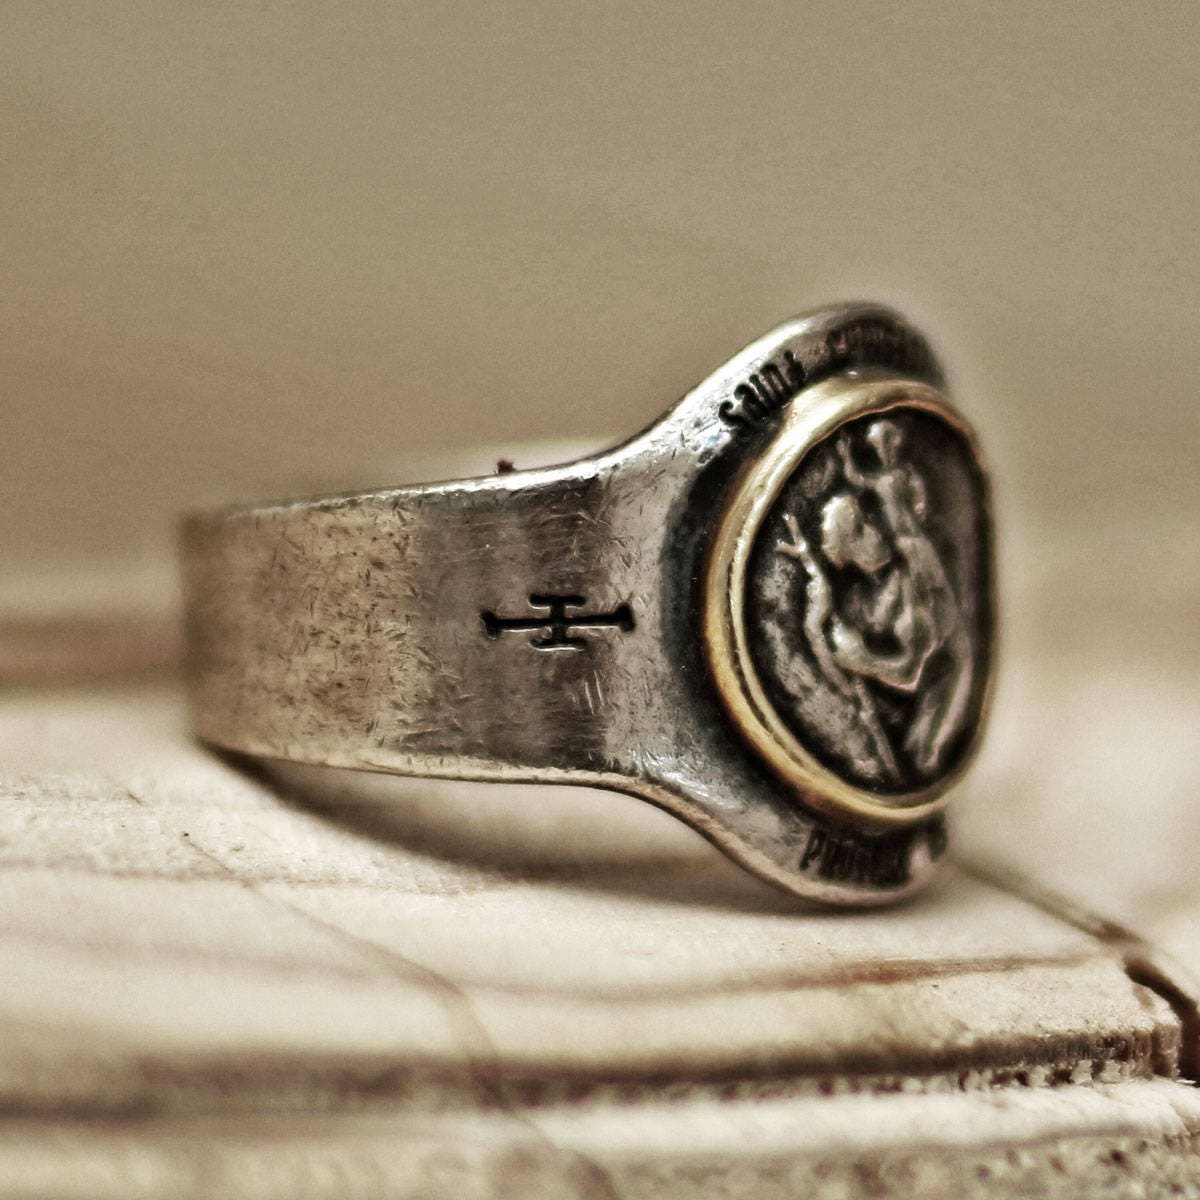 St. Christopher Coin Clamped Vintage Style Silver Ring, Recommended As A Catholic Religious Ring